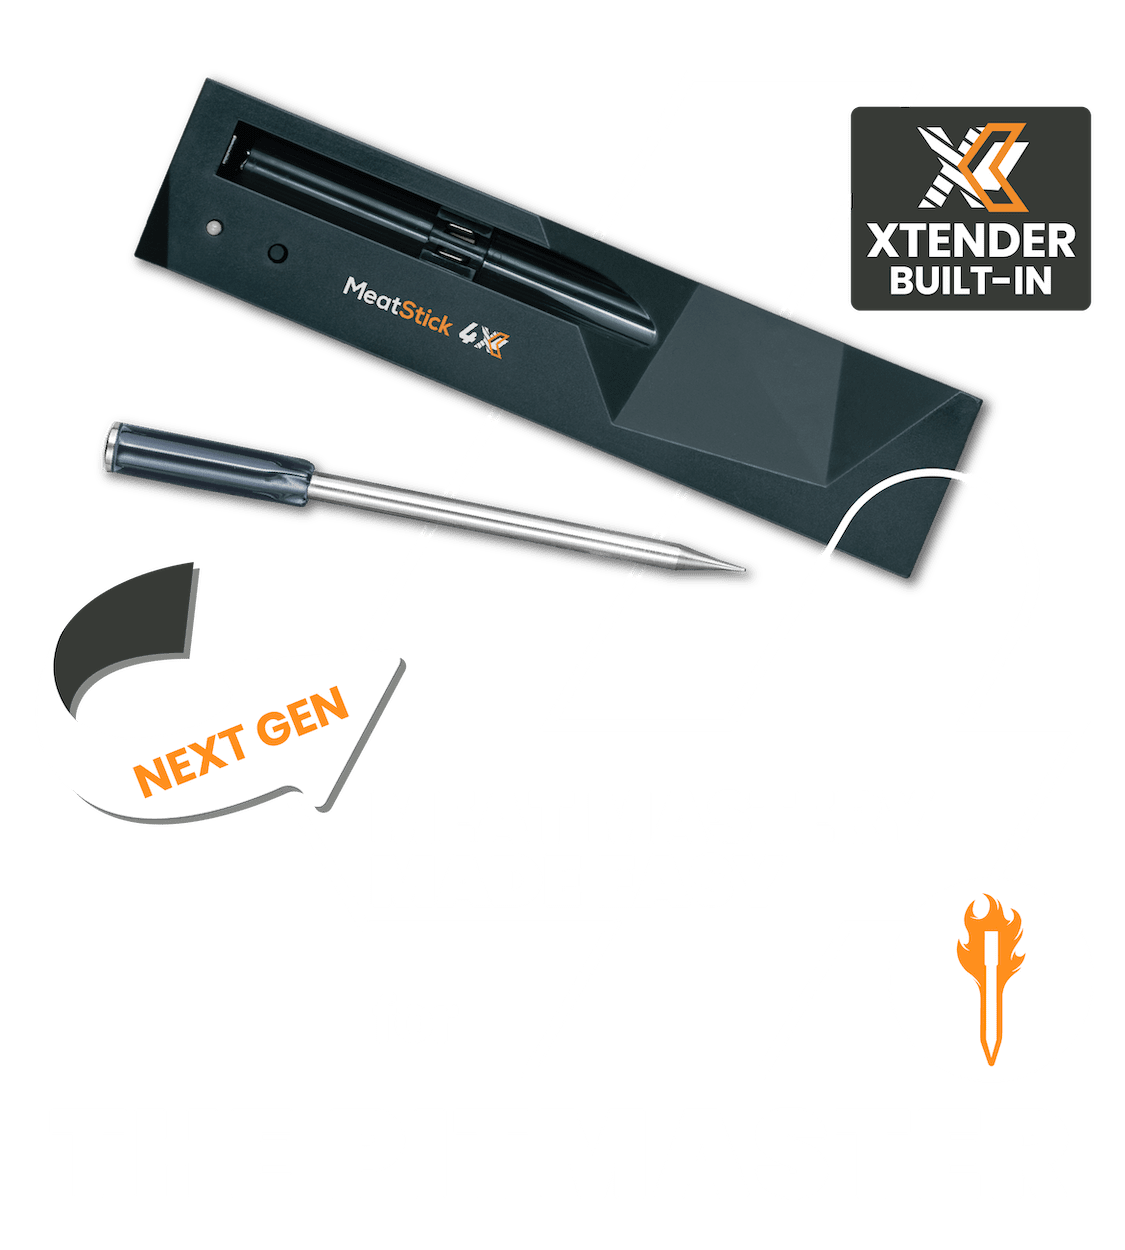 MeatStick 4X Next Gen Quad Sensors Wireless Meat Thermometer for The Pitmaster